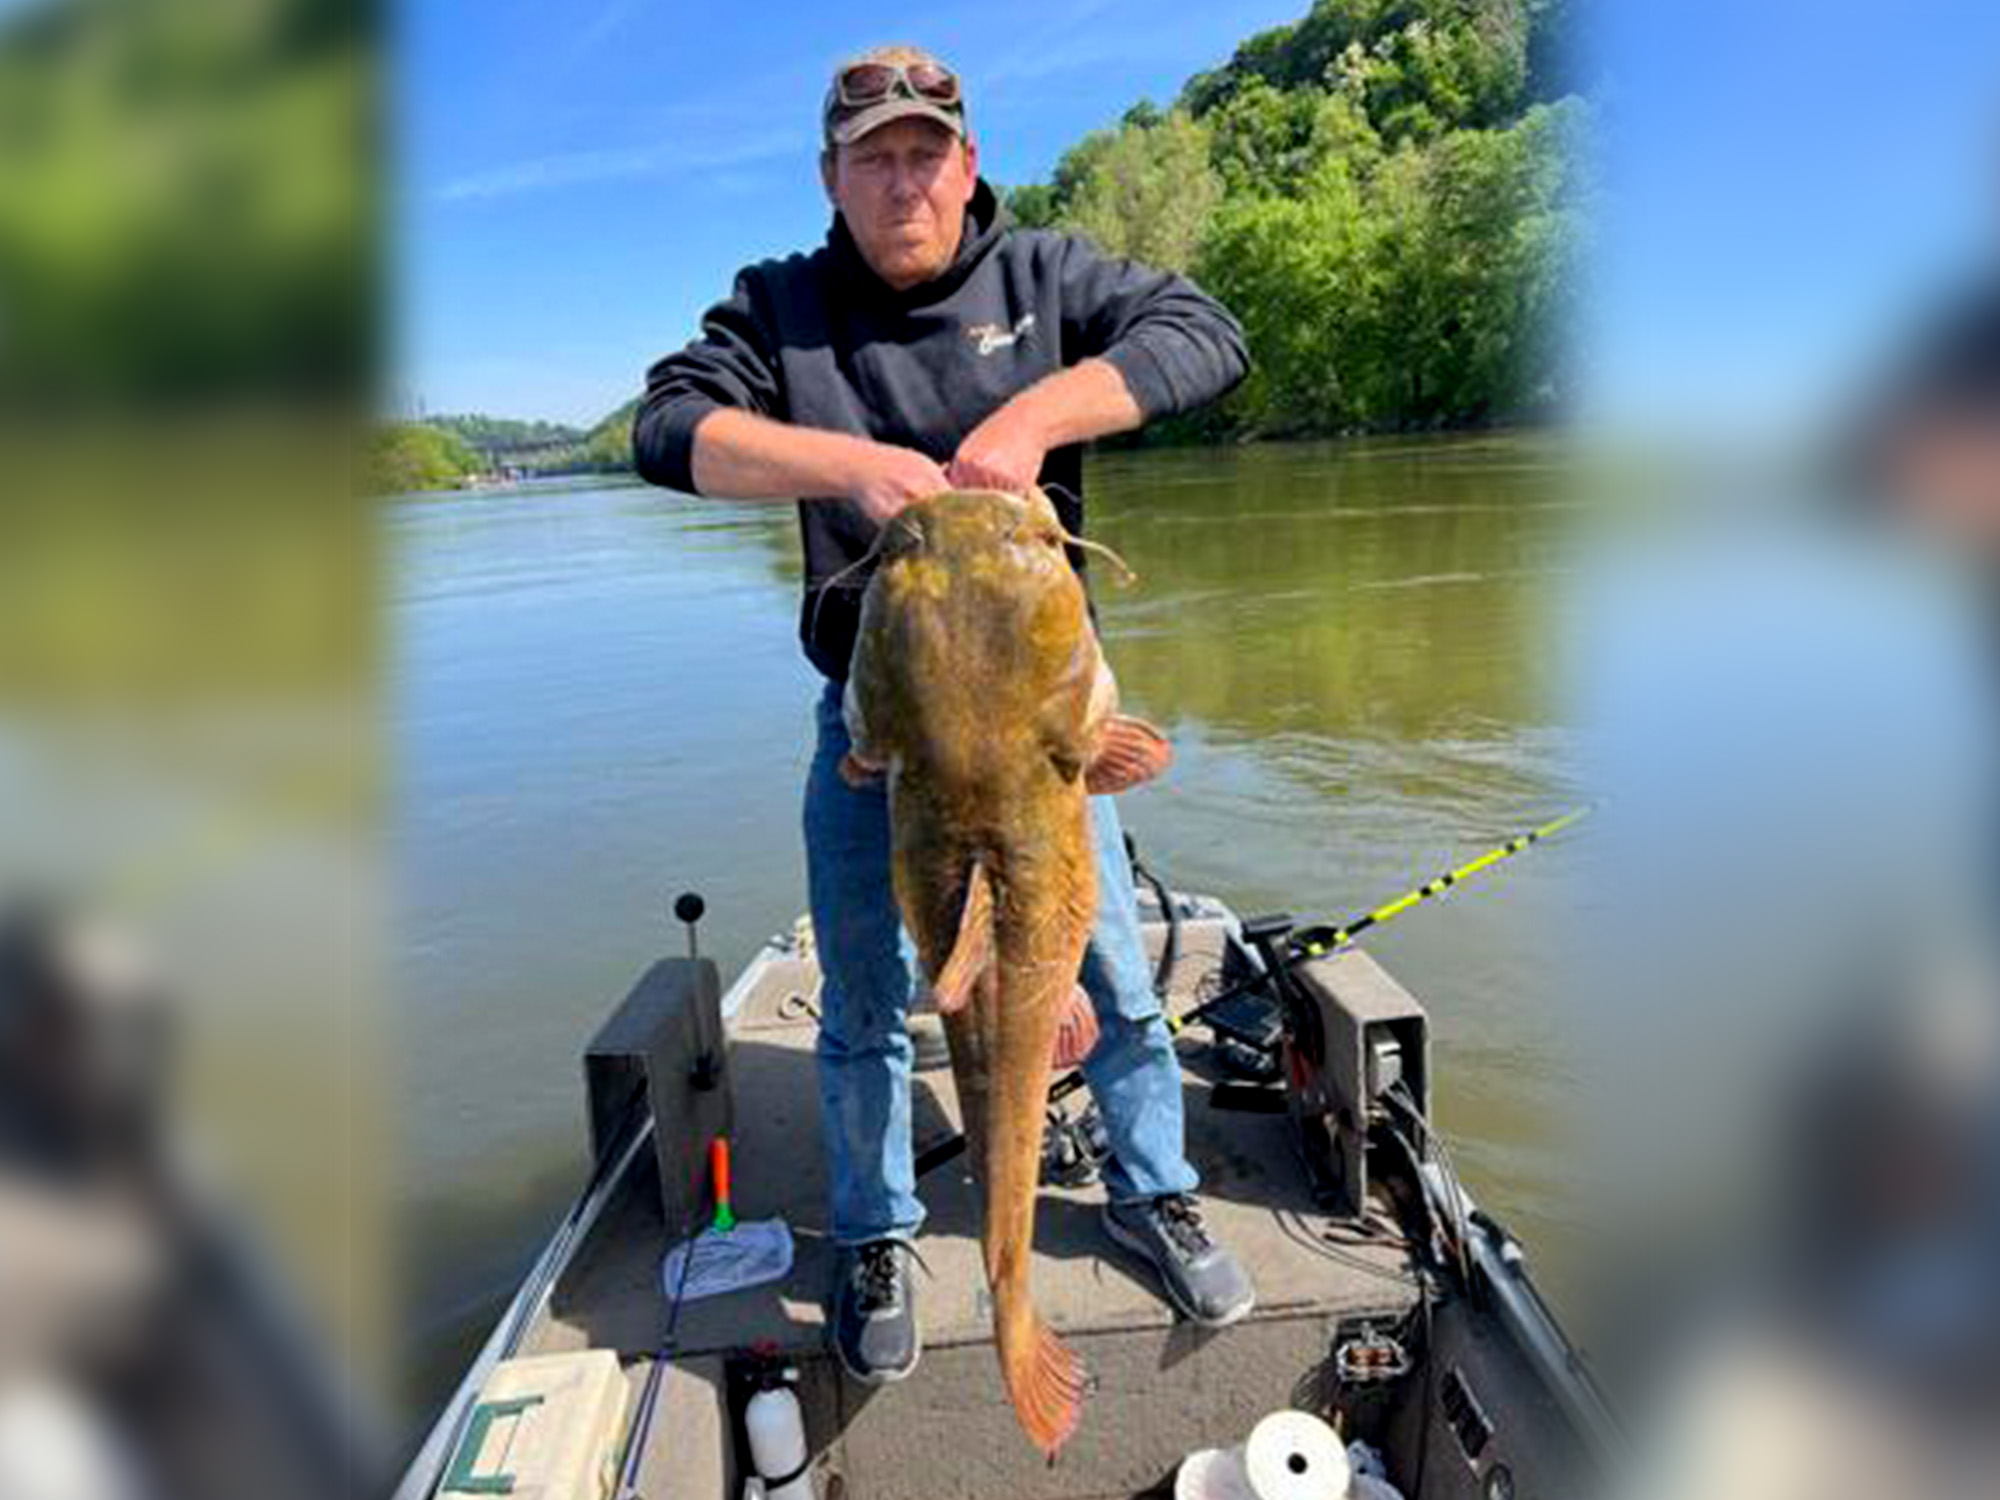 Giant Flathead Catfish Confirmed as New Pennsylvania State Record